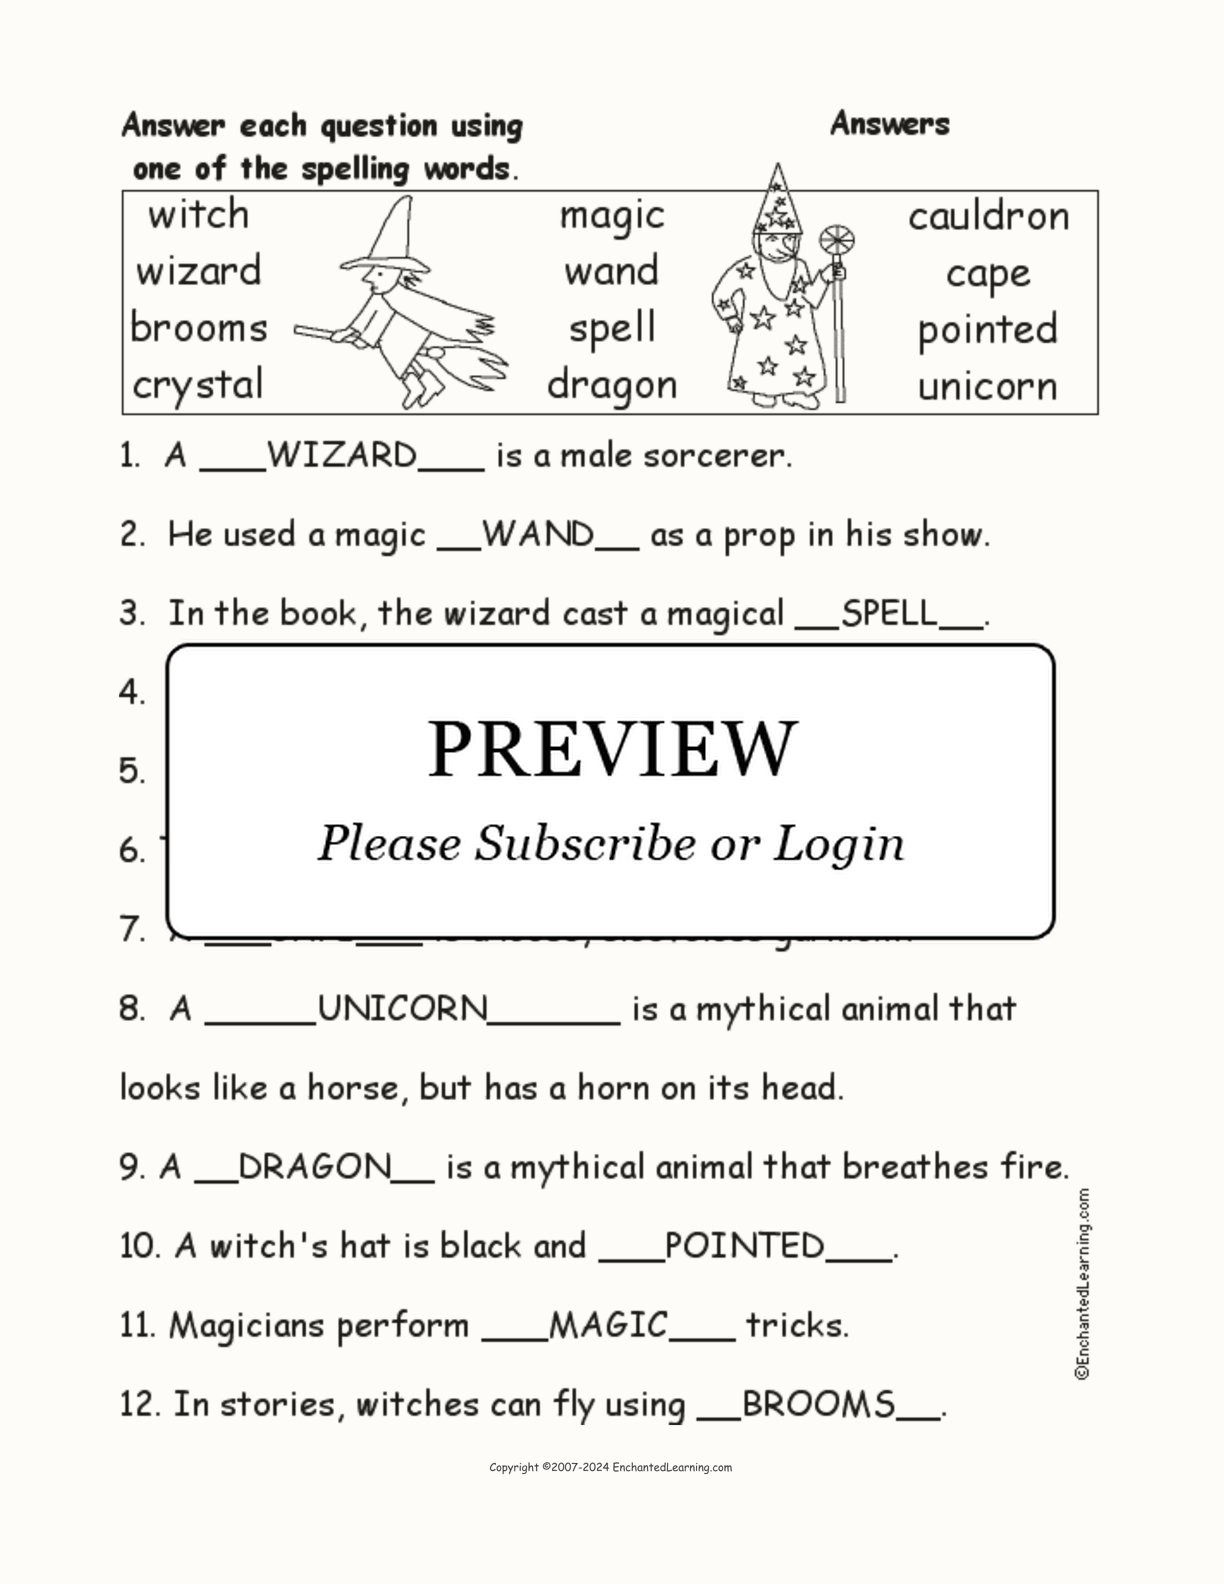 Witch Spelling Word Questions interactive worksheet page 2